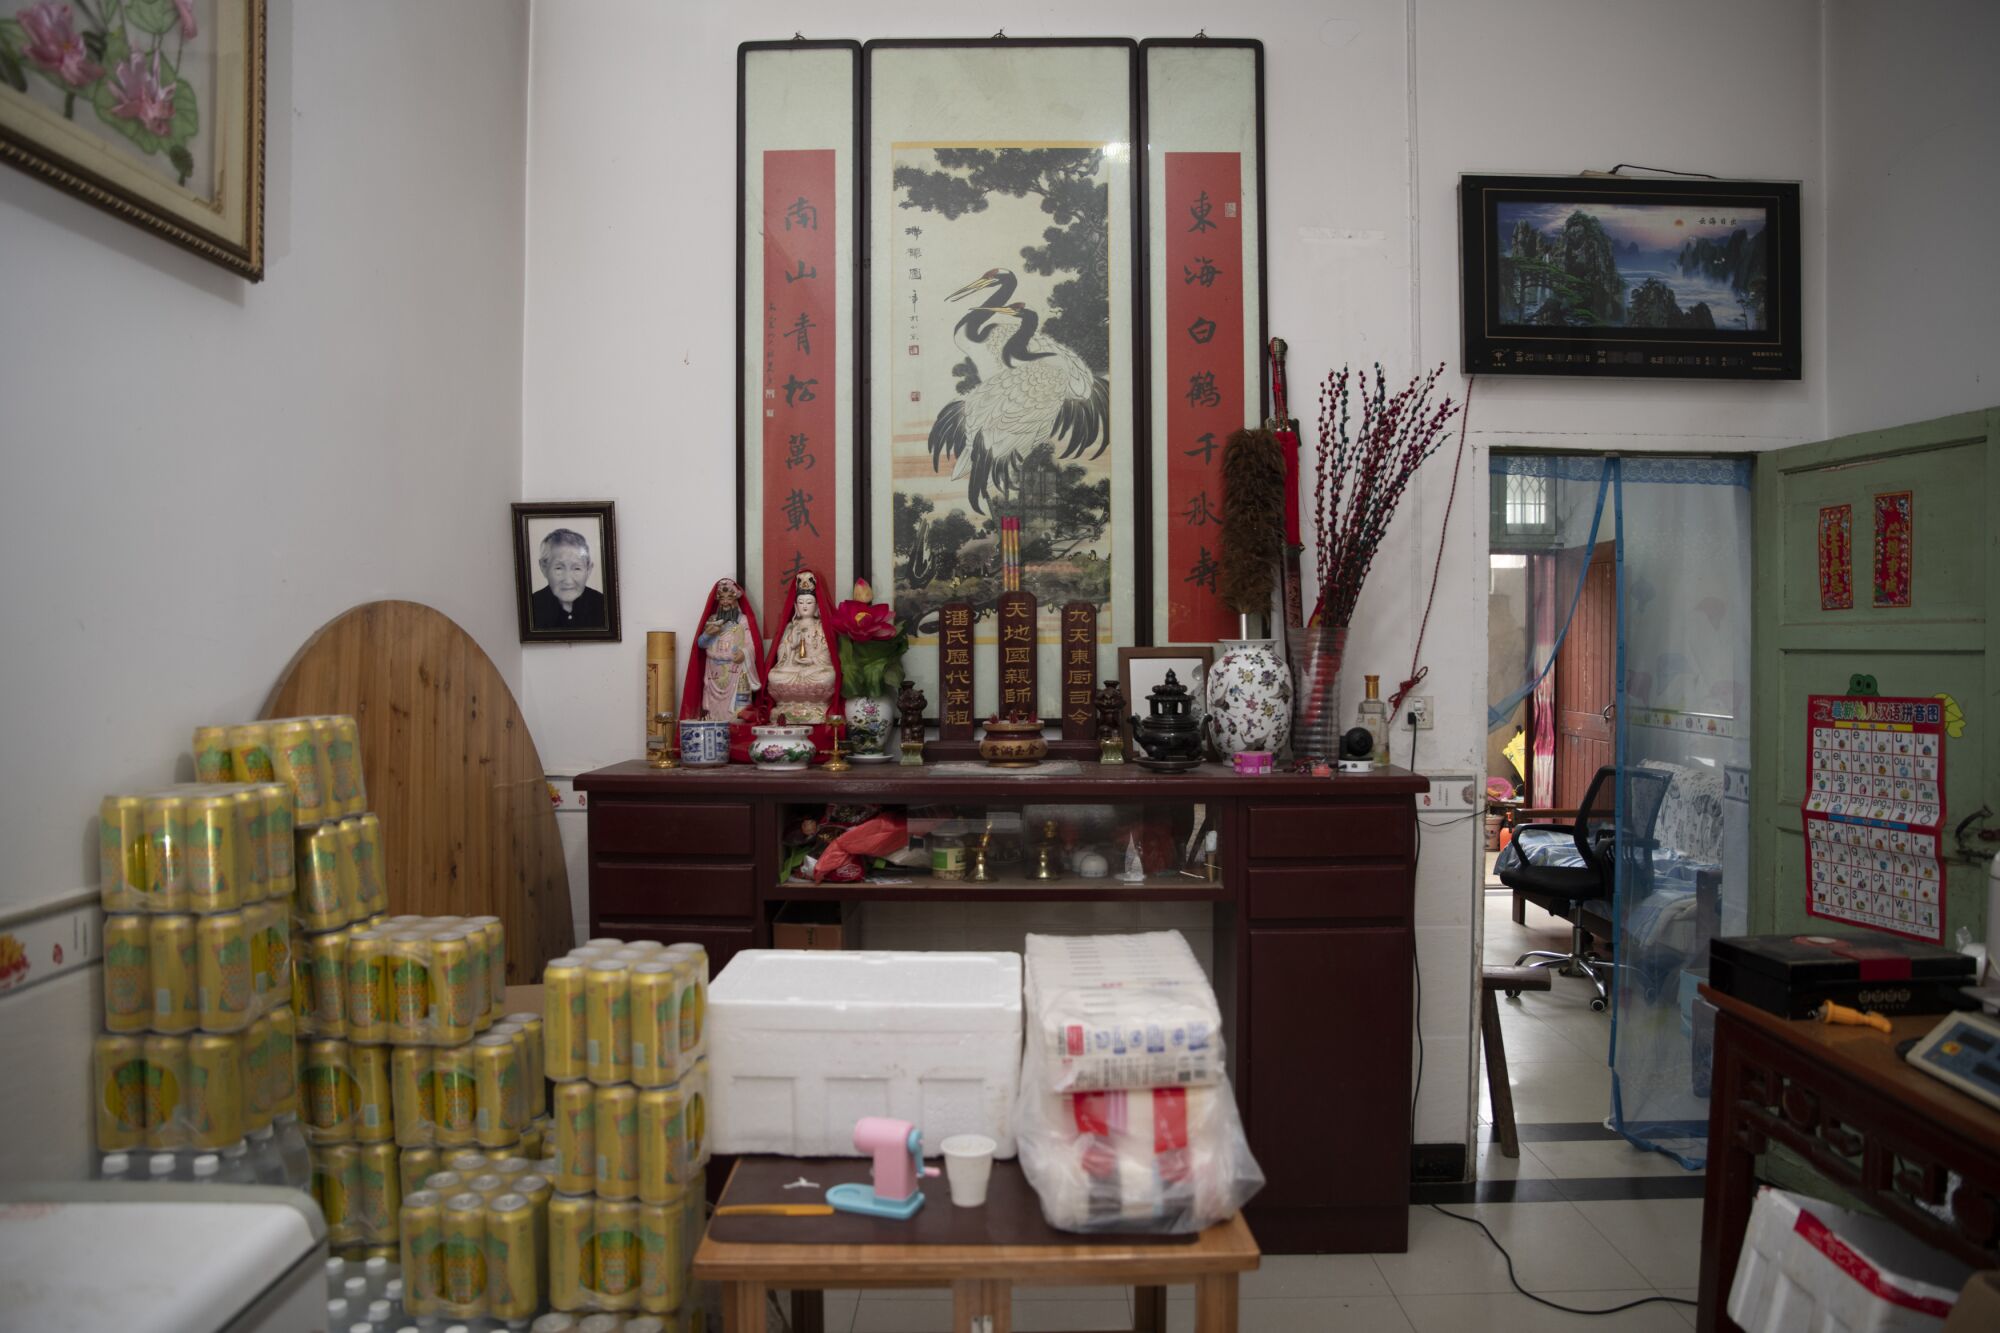 Pan Bangfeng converted the entrance hall to his home into a makeshift mini-mart during the lockdown.